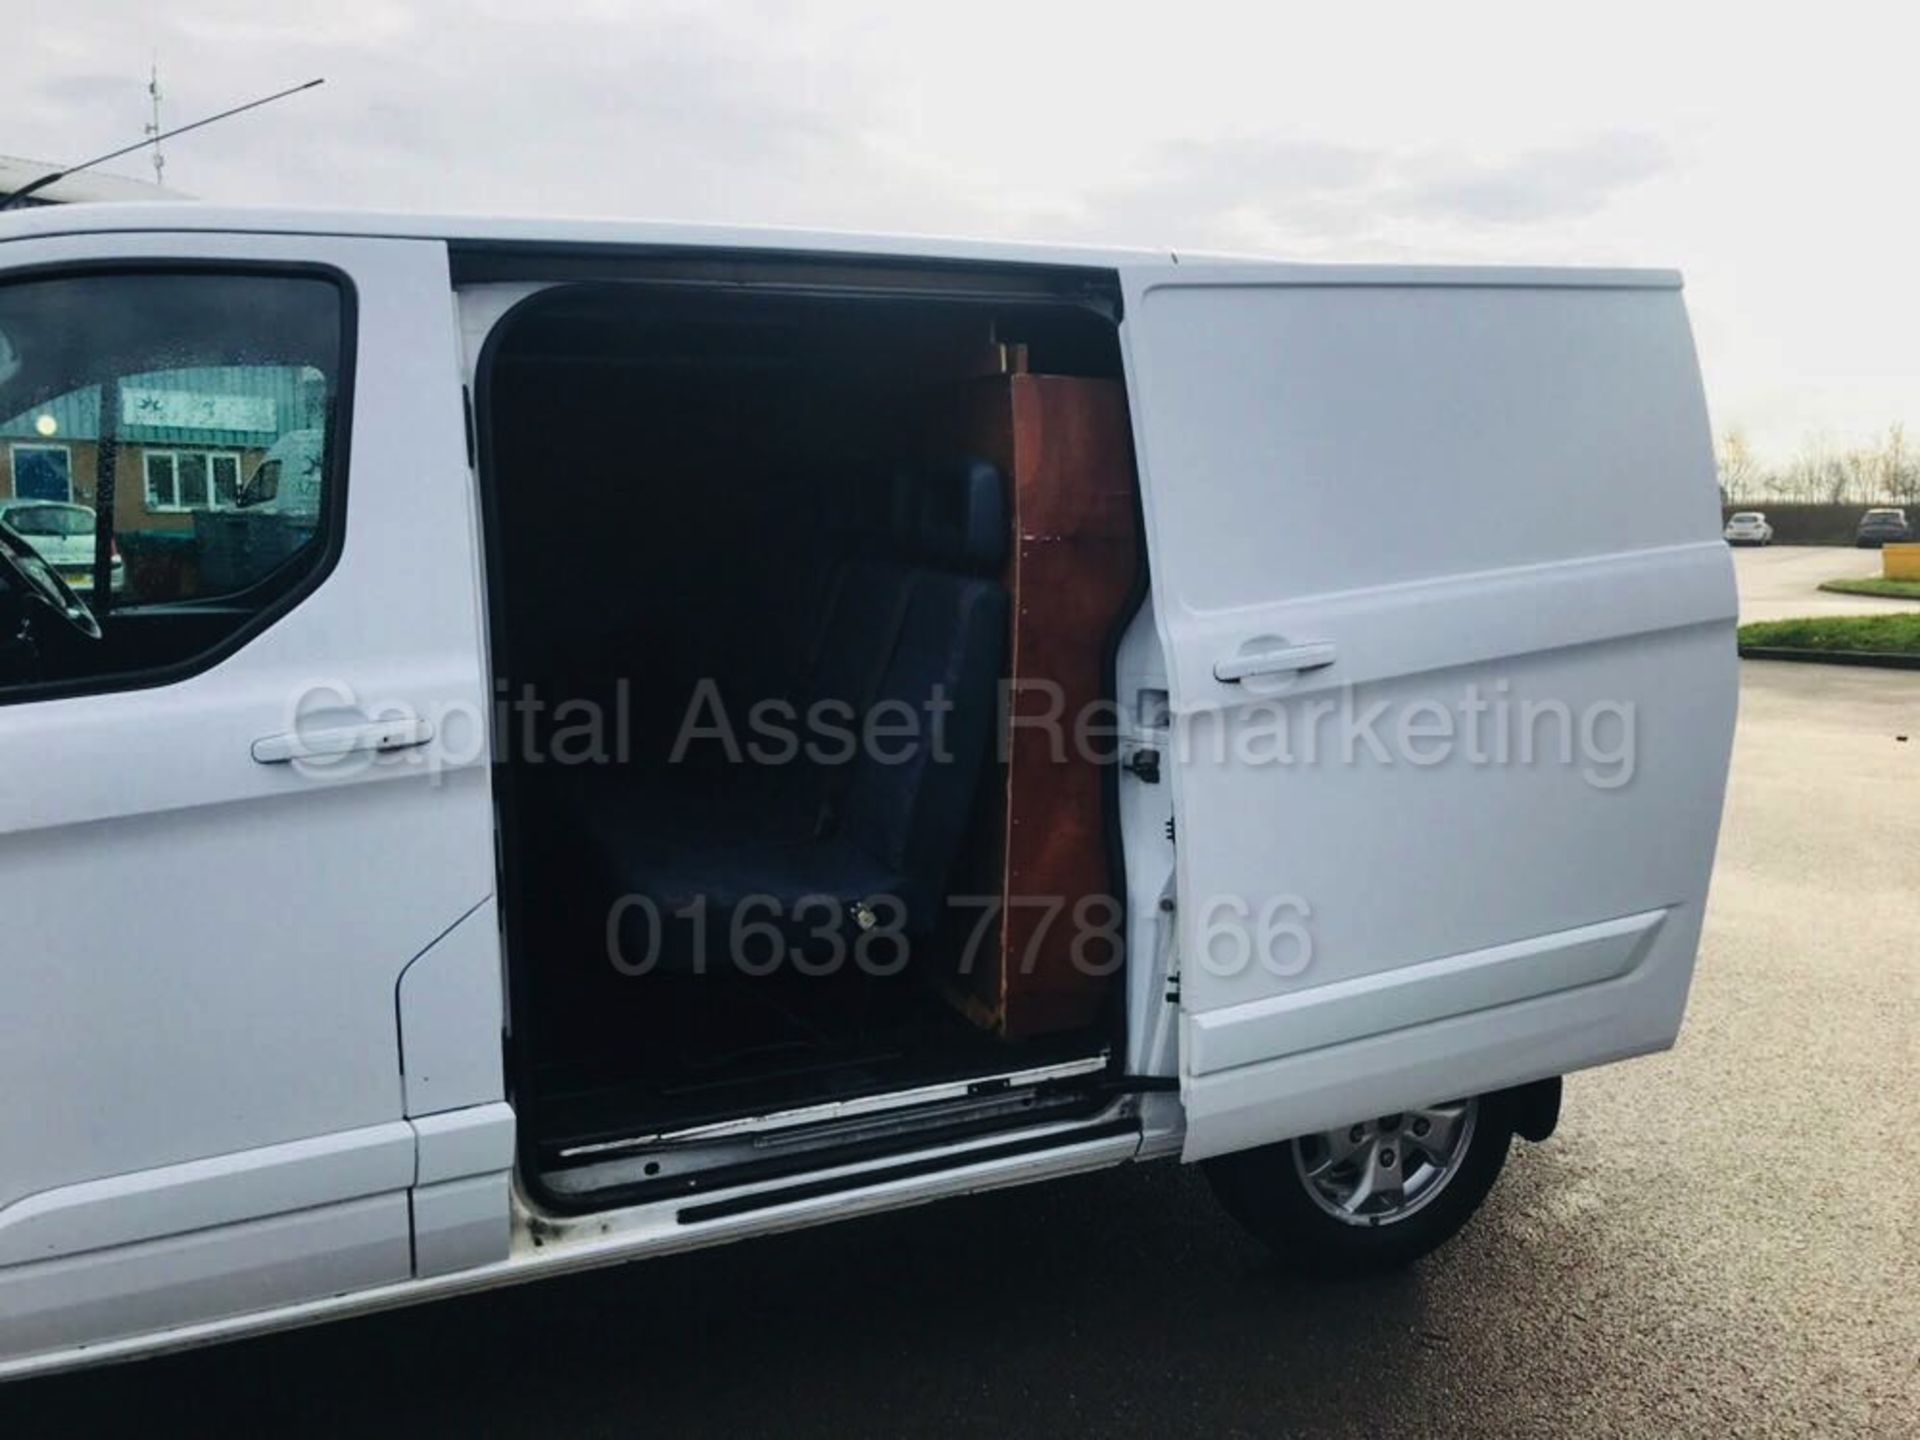 (On Sale) FORD TRANSIT CUSTOM 'LIMITED SPEC' (2013 - NEW MODEL) '2.2 TDCI - 6 SPEED' *A/C* (NO VAT) - Image 14 of 32